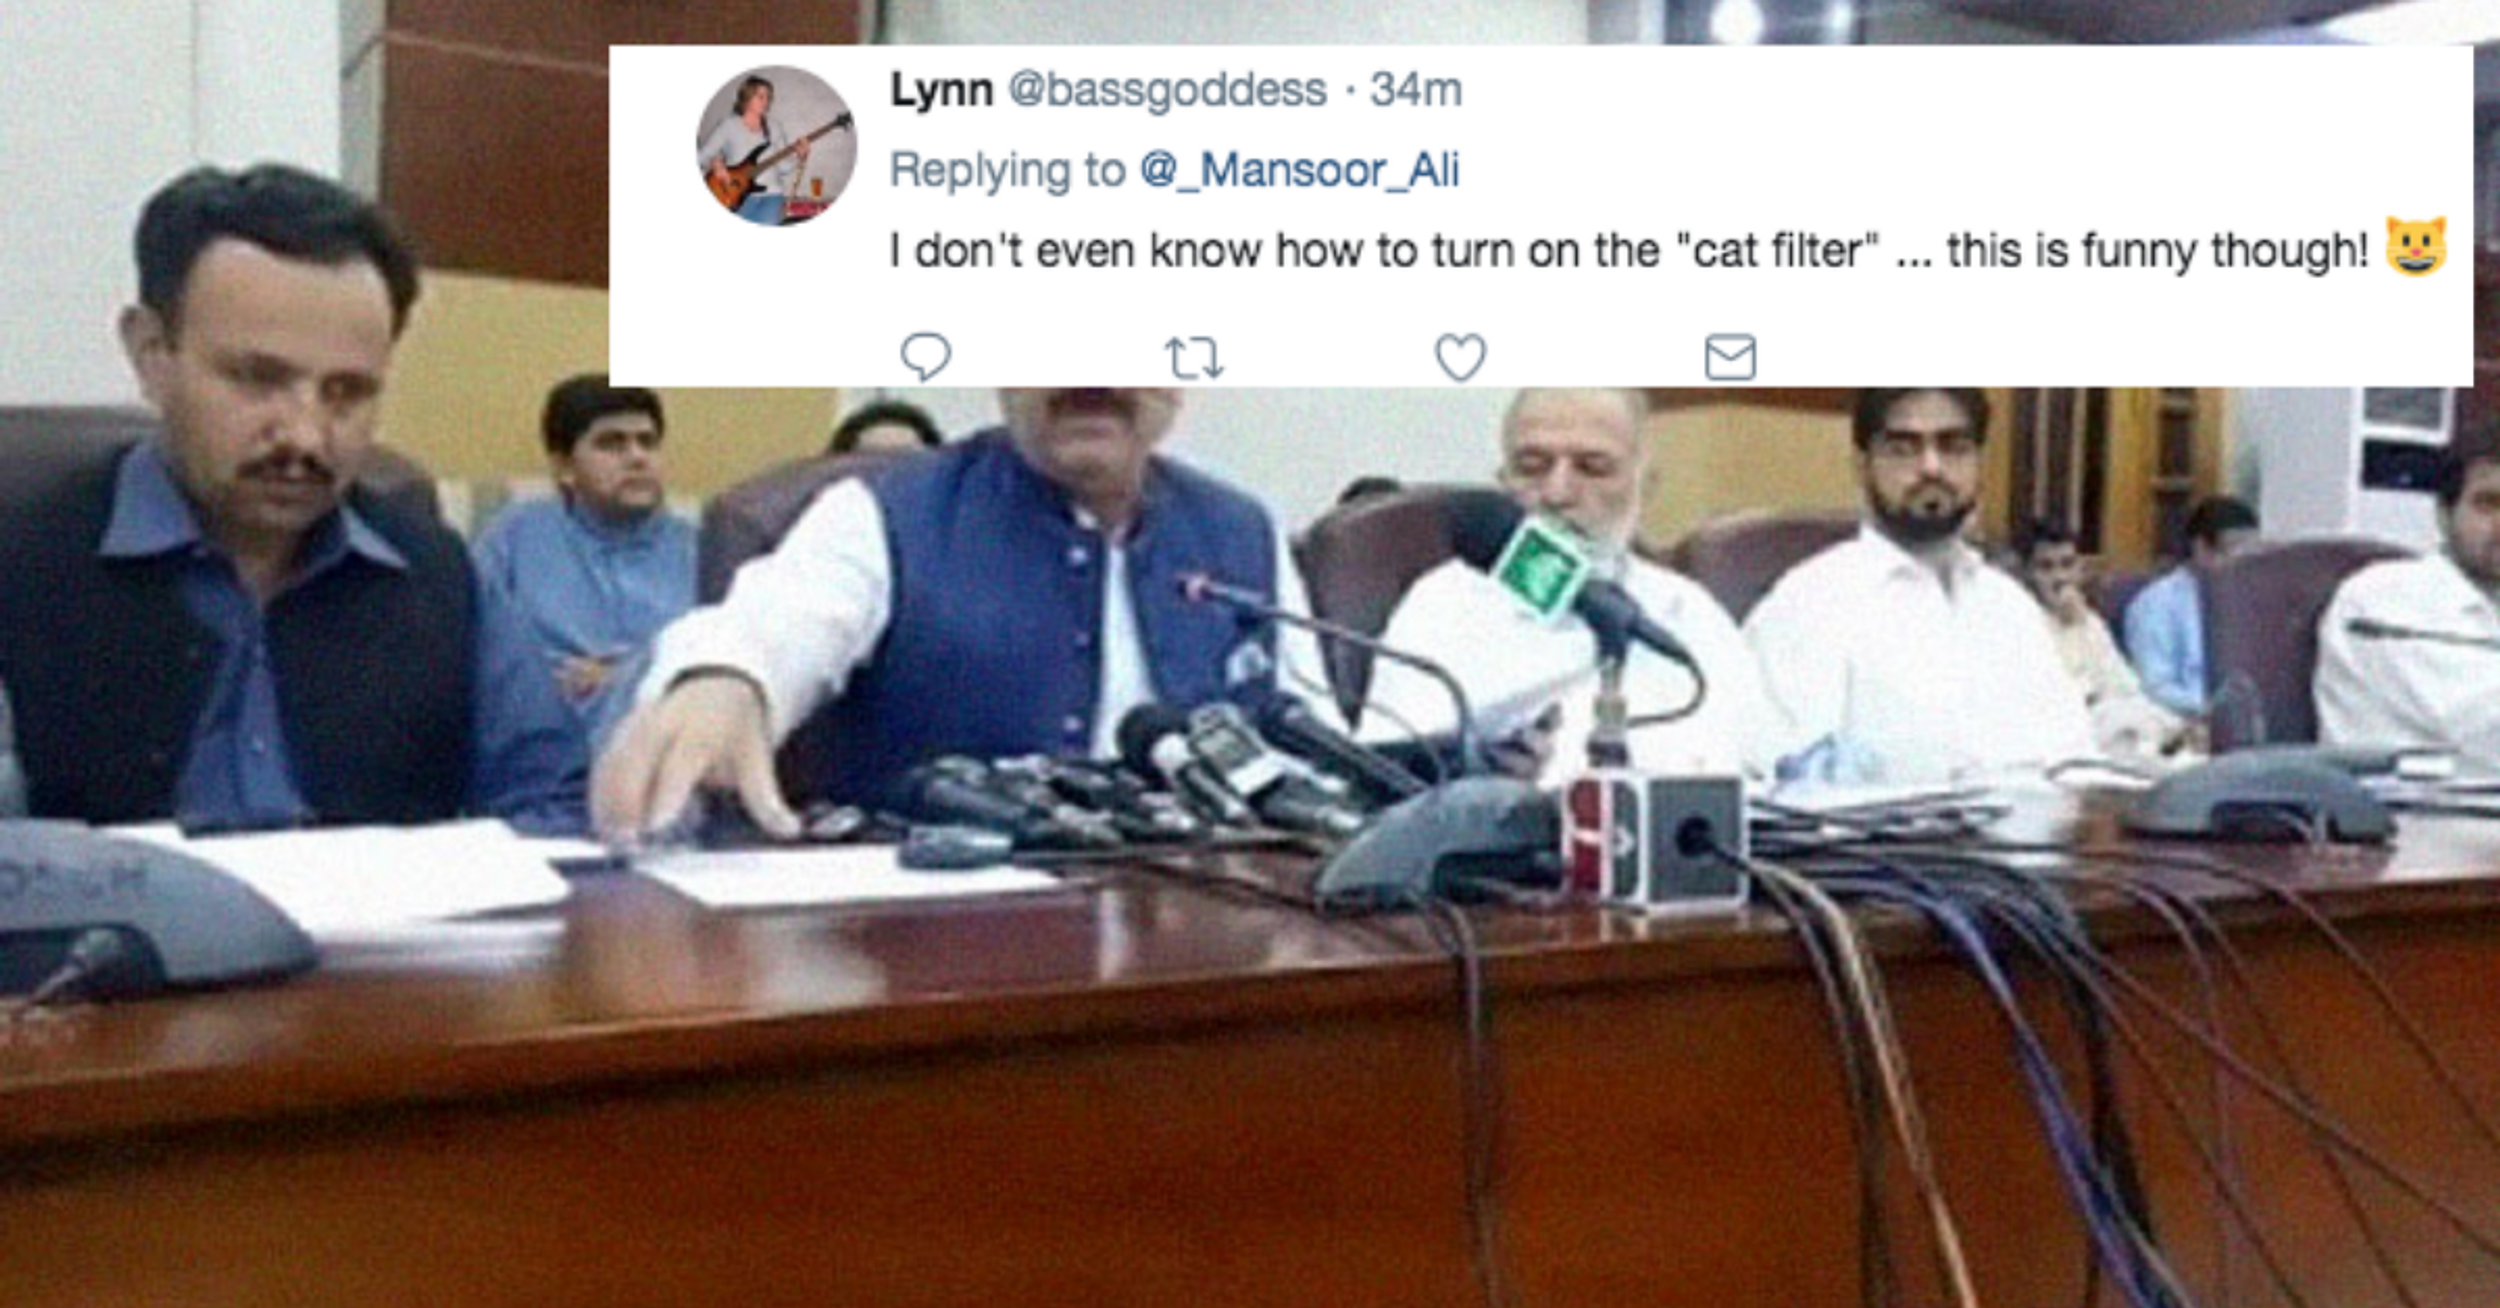 Pakistan's Ruling Party Apologizes After Accidentally Holding Facebook Live Press Conference With Cat Filter Turned On